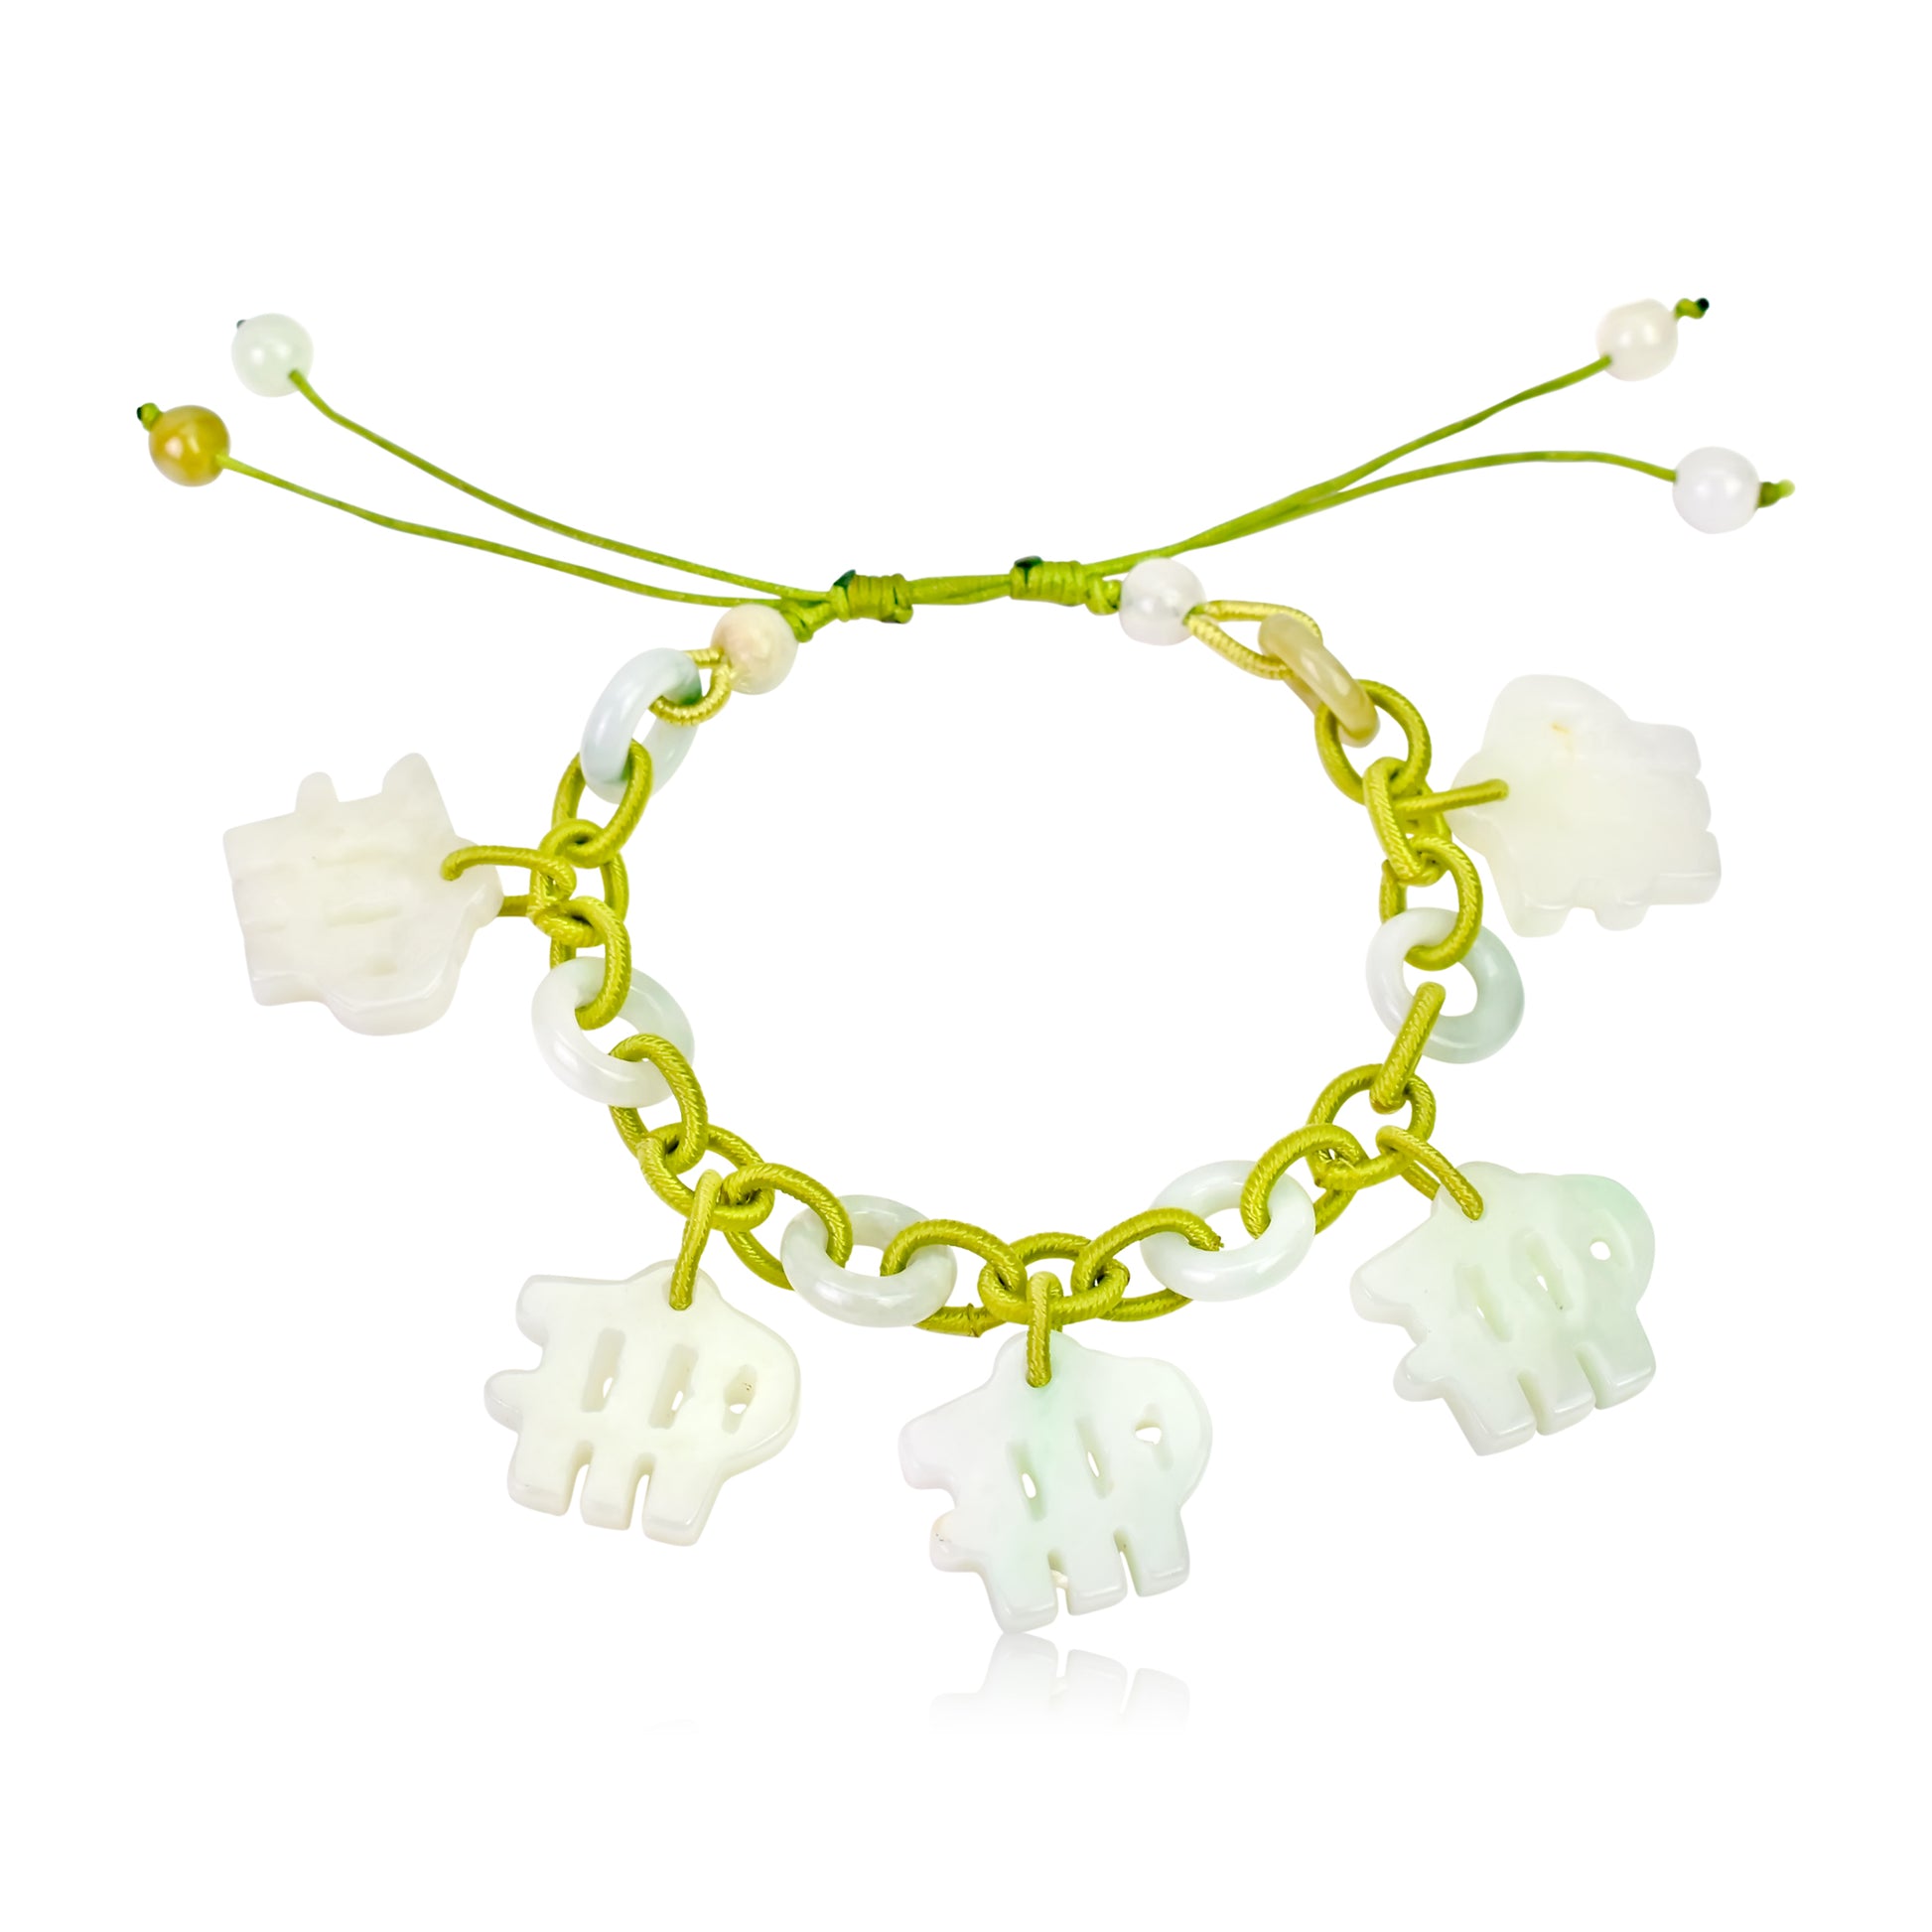 A Perfect Gift for the Methodical Virgo with this Jade Bracelet made with Lime Cord